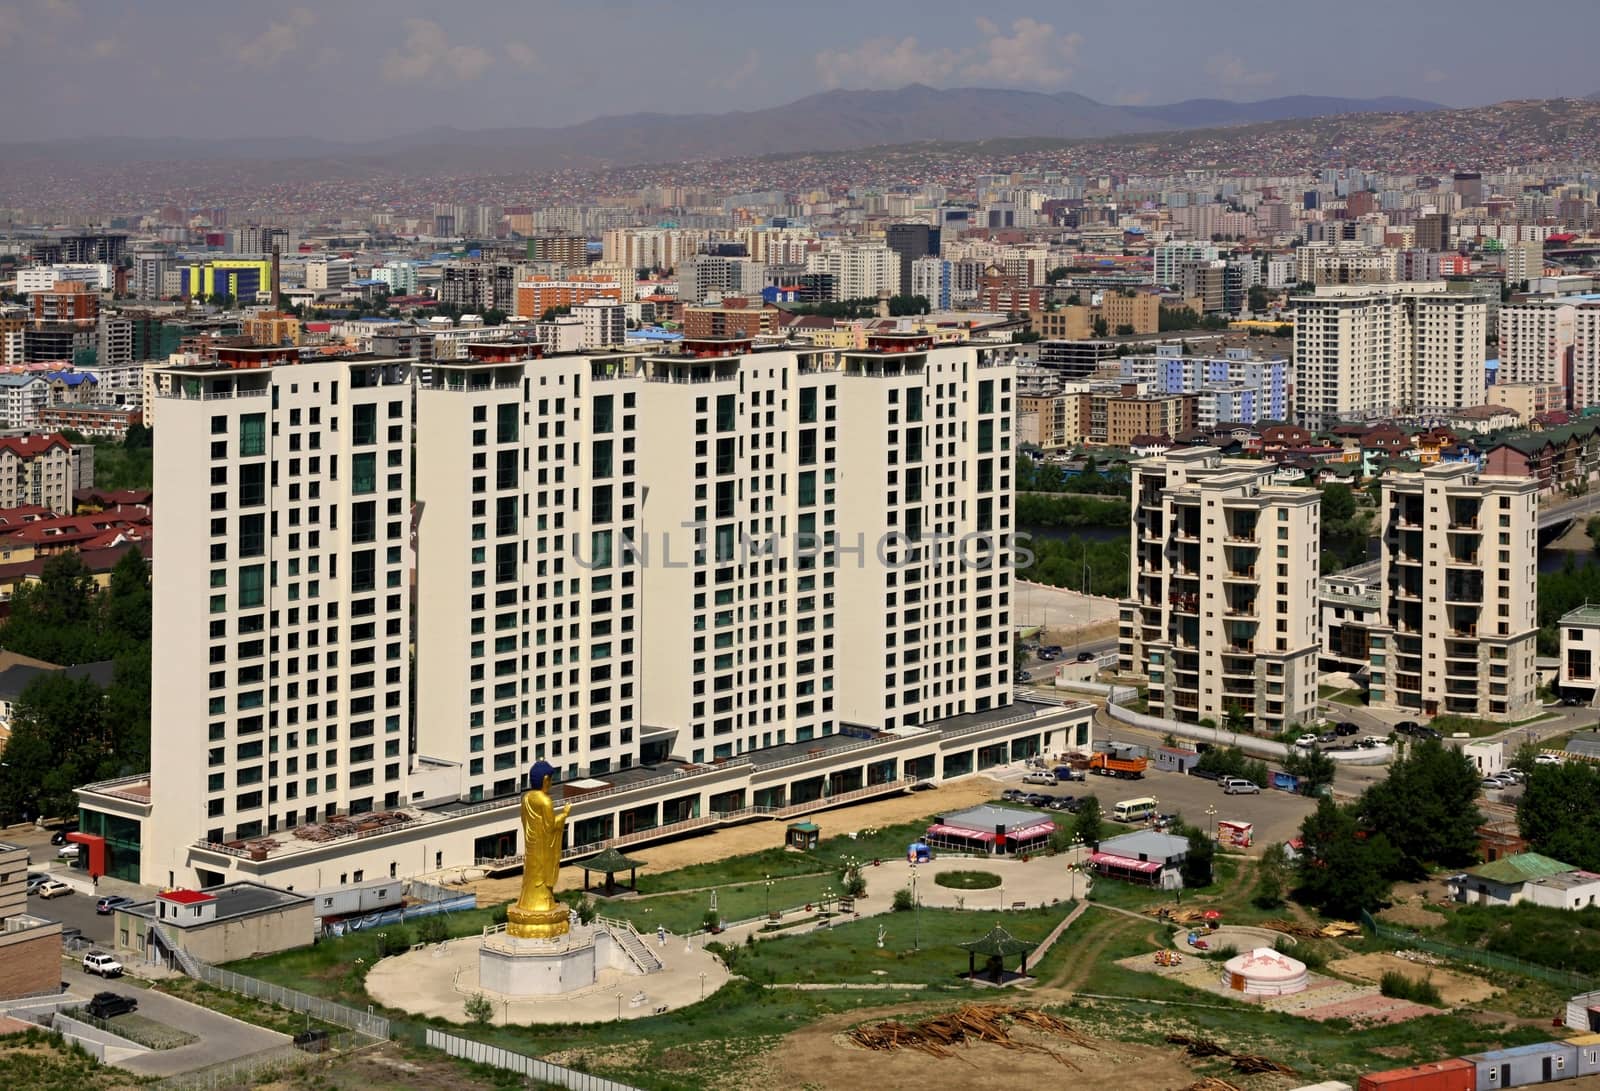 New construction of buildings in the capital city Ulaanbaatar,Mongolia